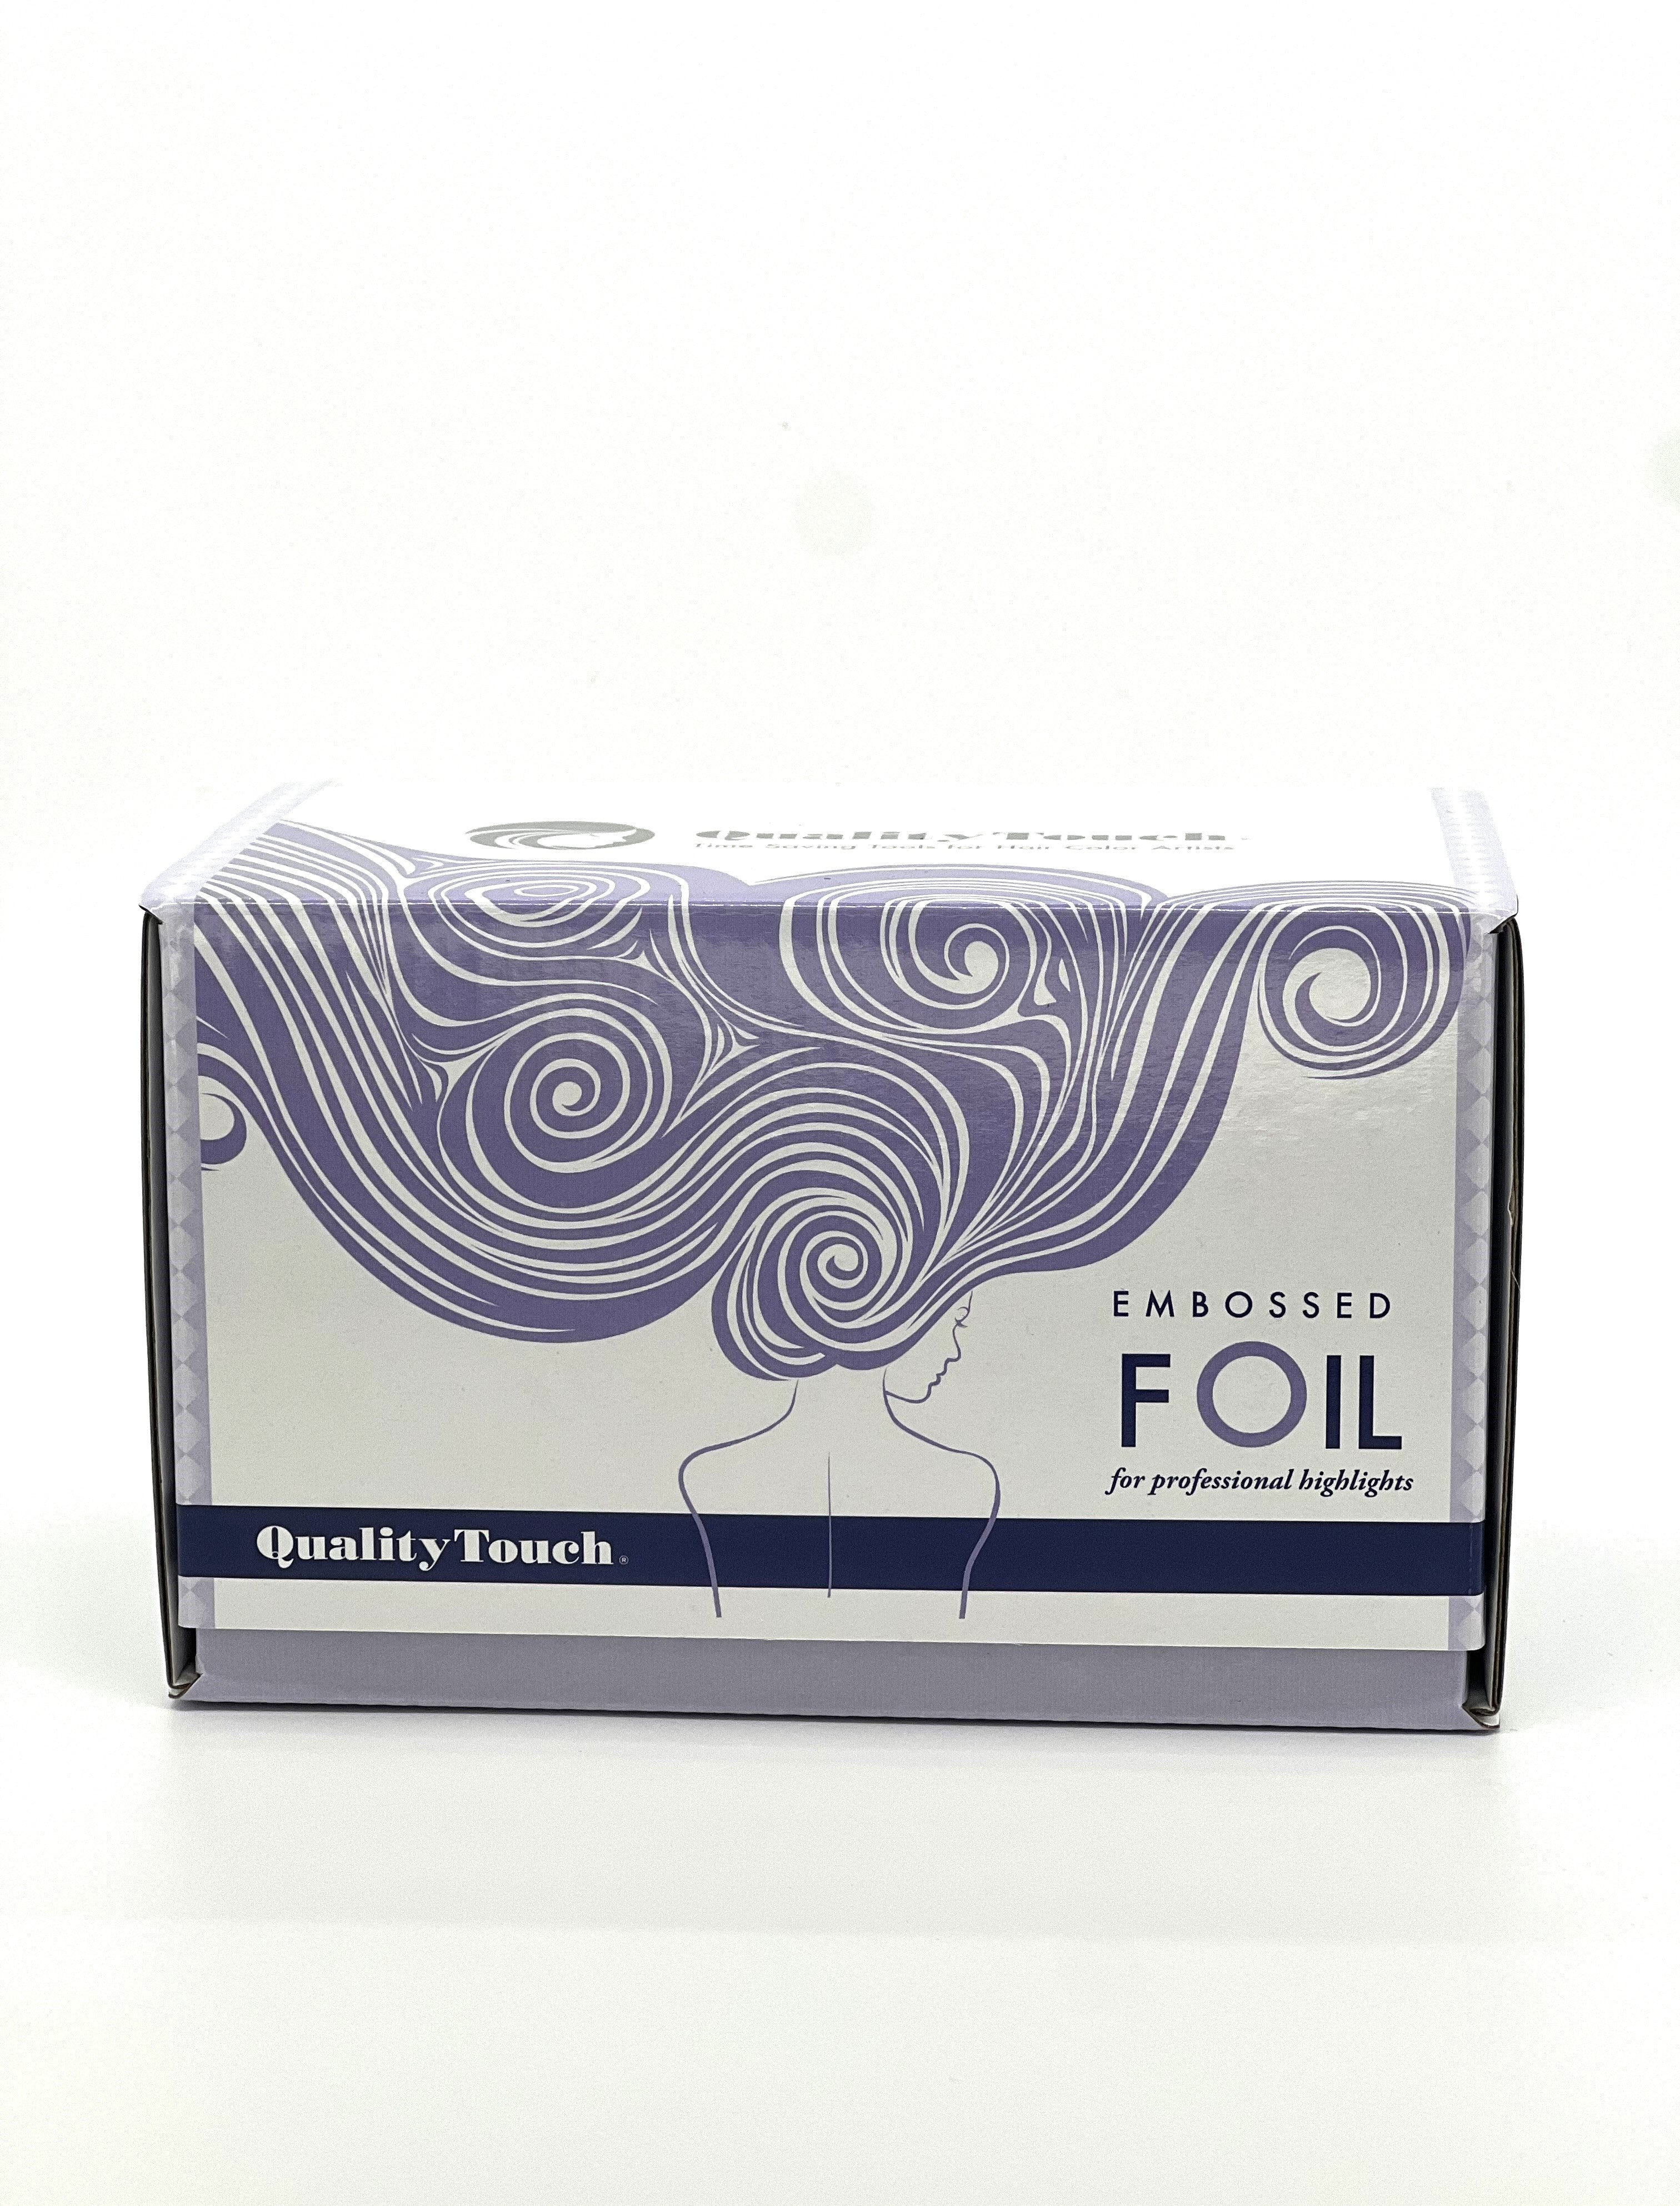 Textured Peritwinkle Rolled Foil 250ft | Quality Touch | Shop Colored and Patterned Foil